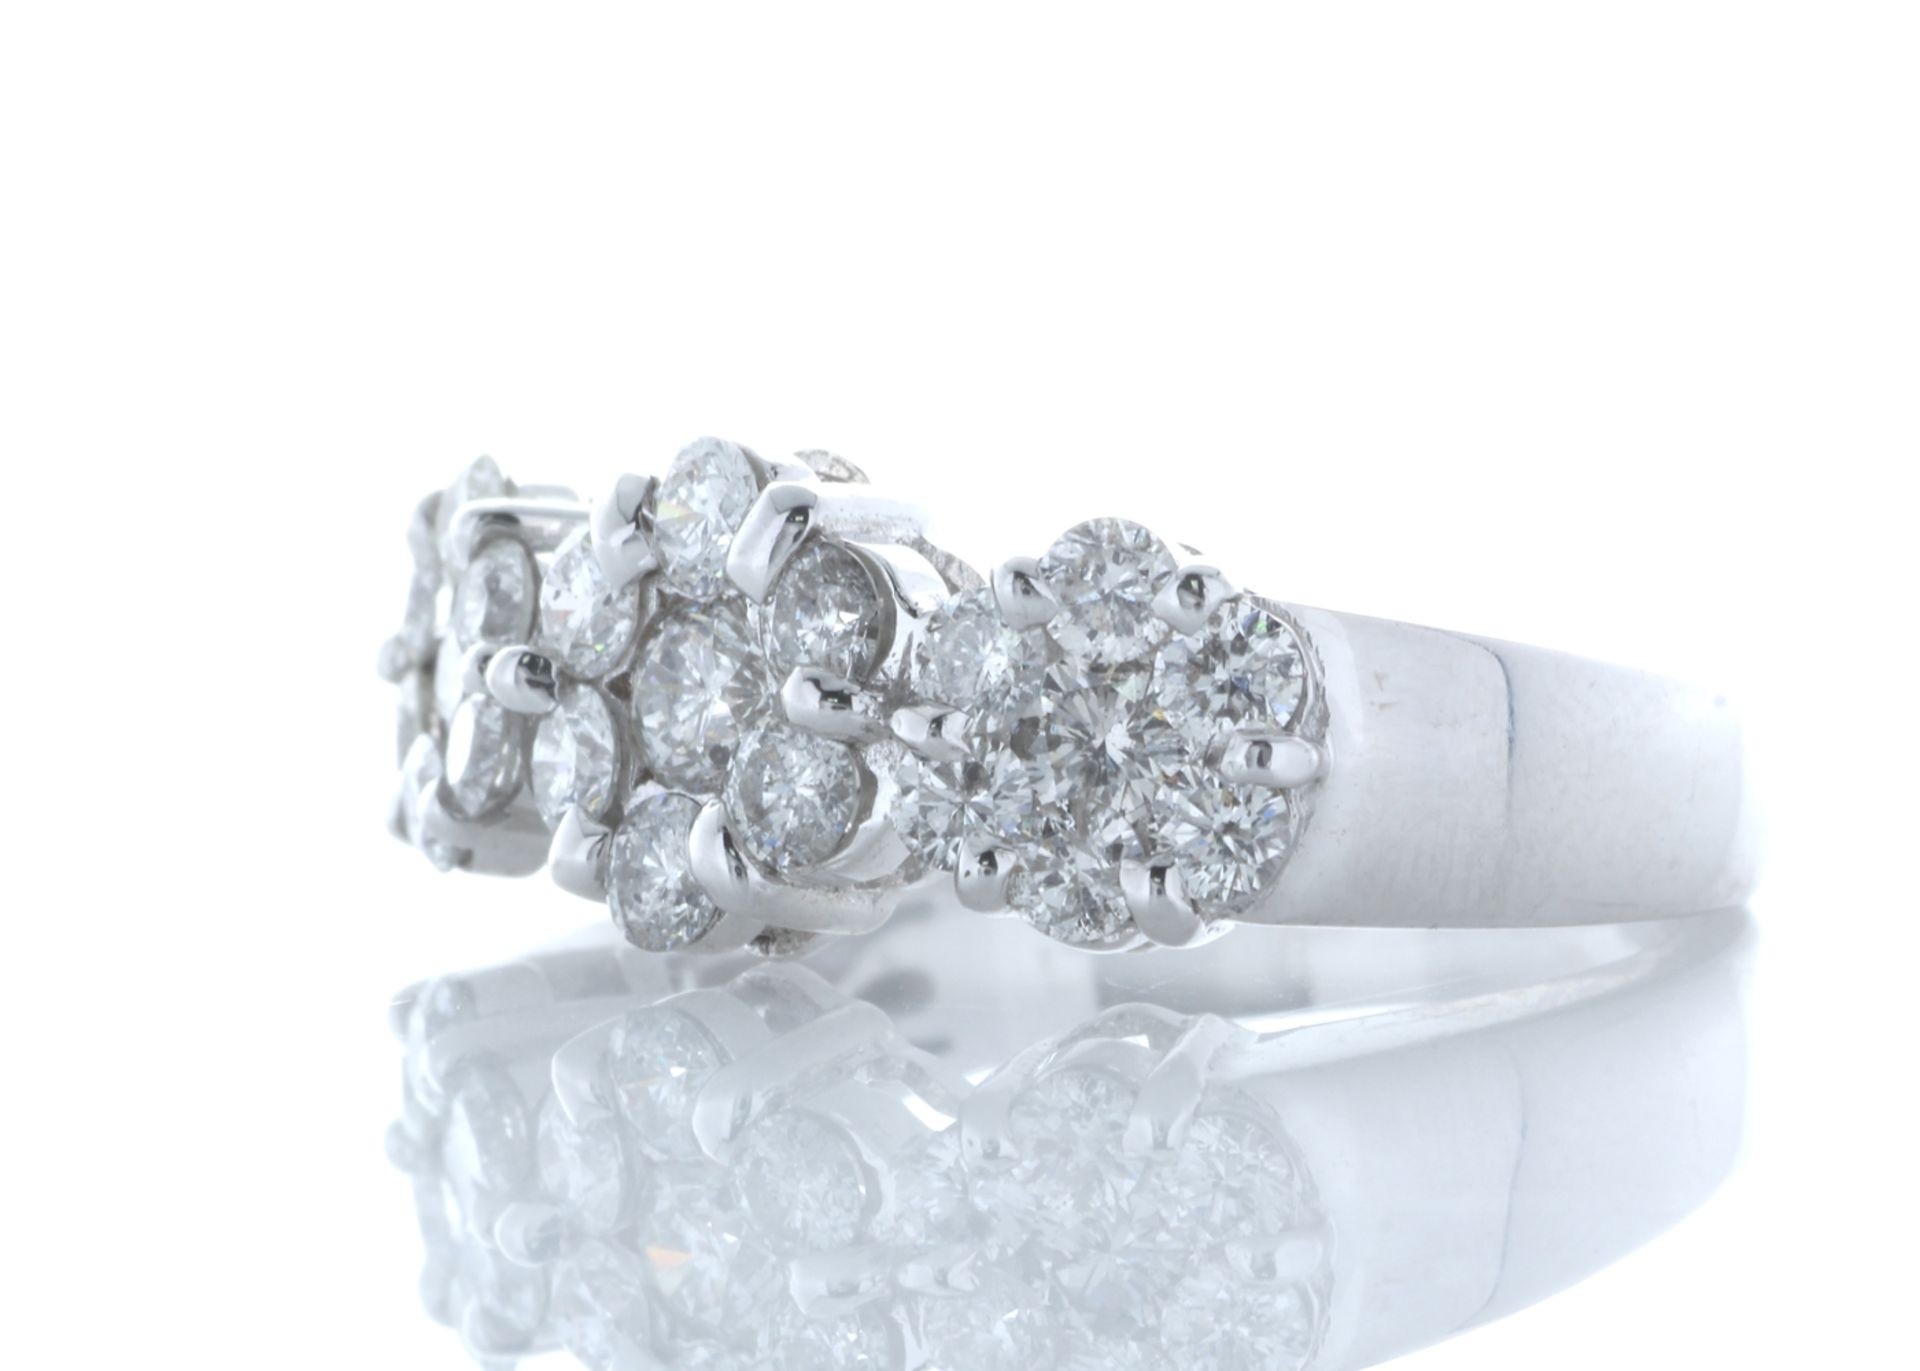 18ct White Gold Flower Cluster Diamond Ring 1.50 Carats - Valued by GIE £18,195.00 - Twenty one - Image 2 of 5